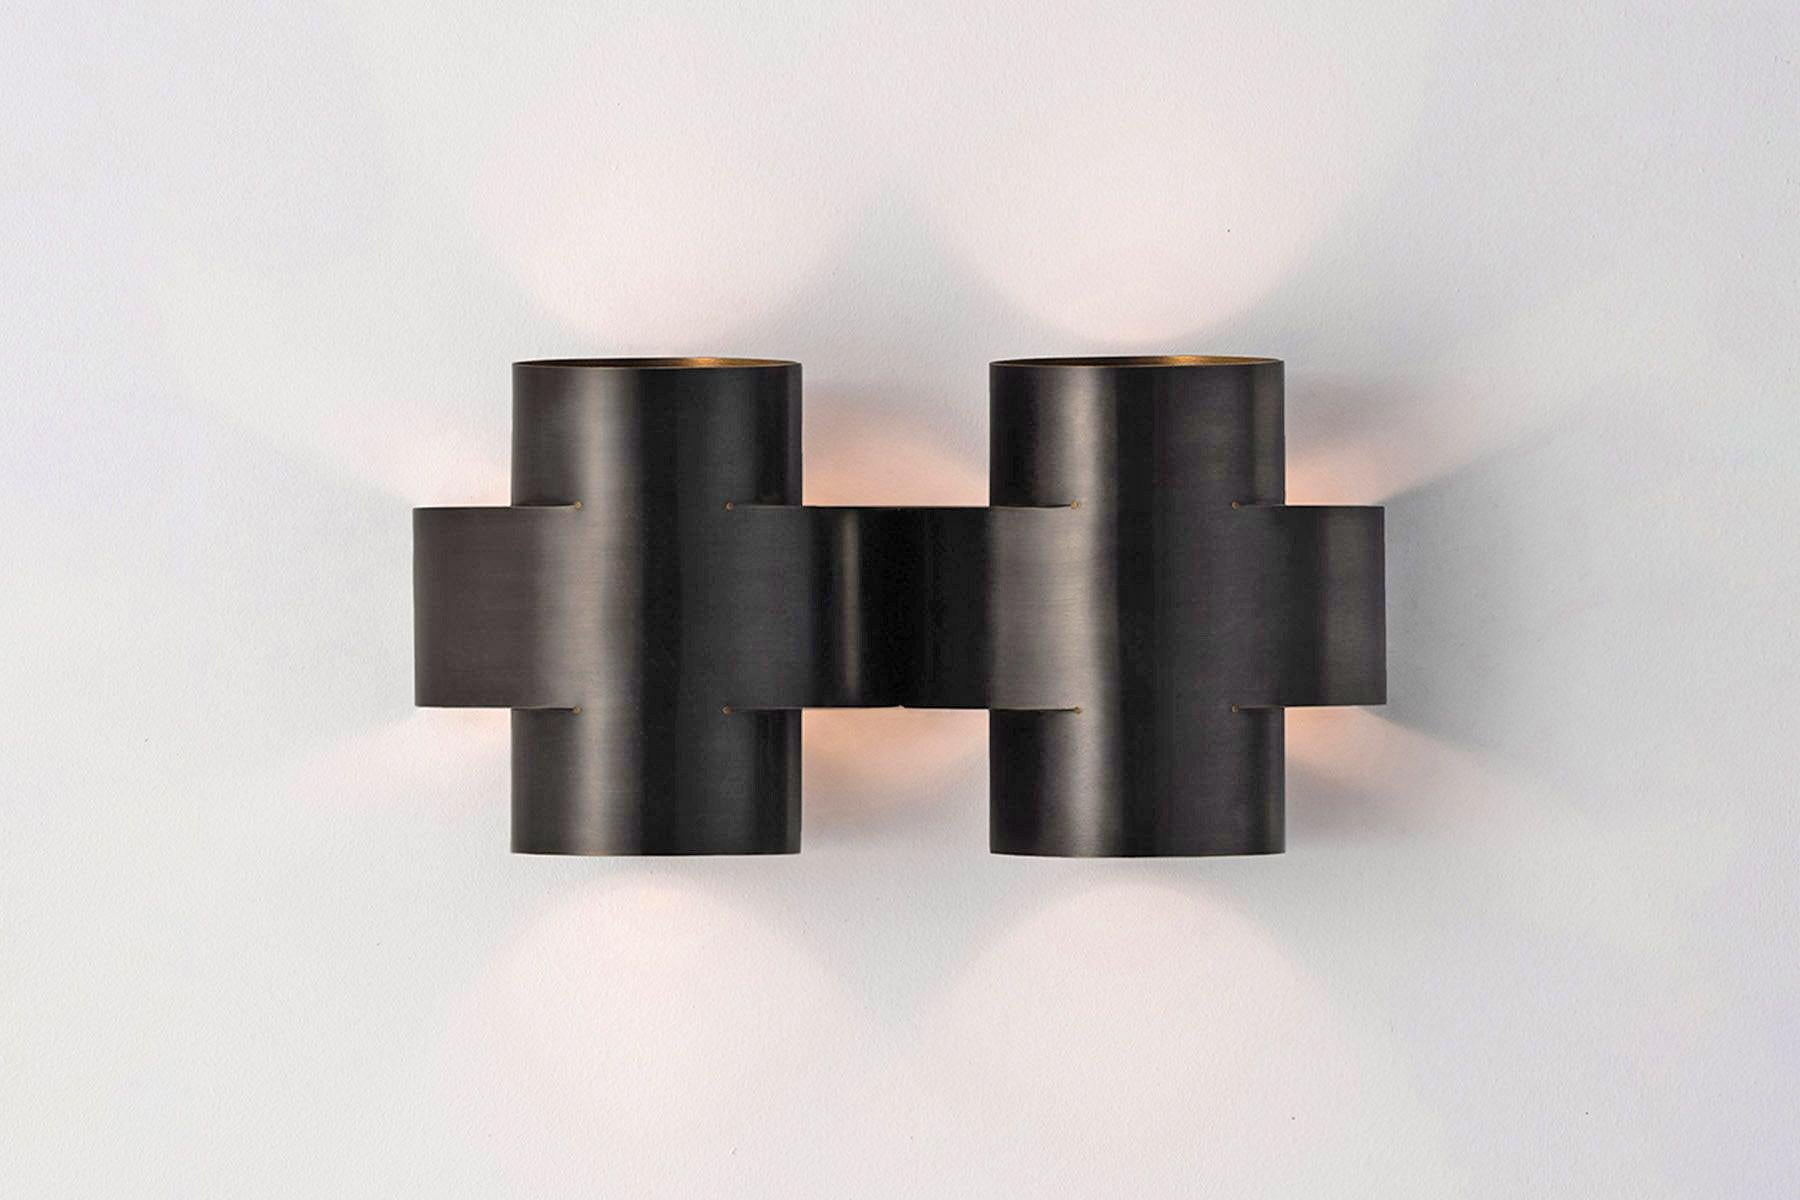 Contemporary Burnt Brass Wall Sconce, Plus Two Large Lamp by Paul Matter

PLUS Series is a new range of appliqués by Paul Matter that feature a simple shape in singular and repetitive arrangements. A 3-Dimensional plus is formed out of a single tube